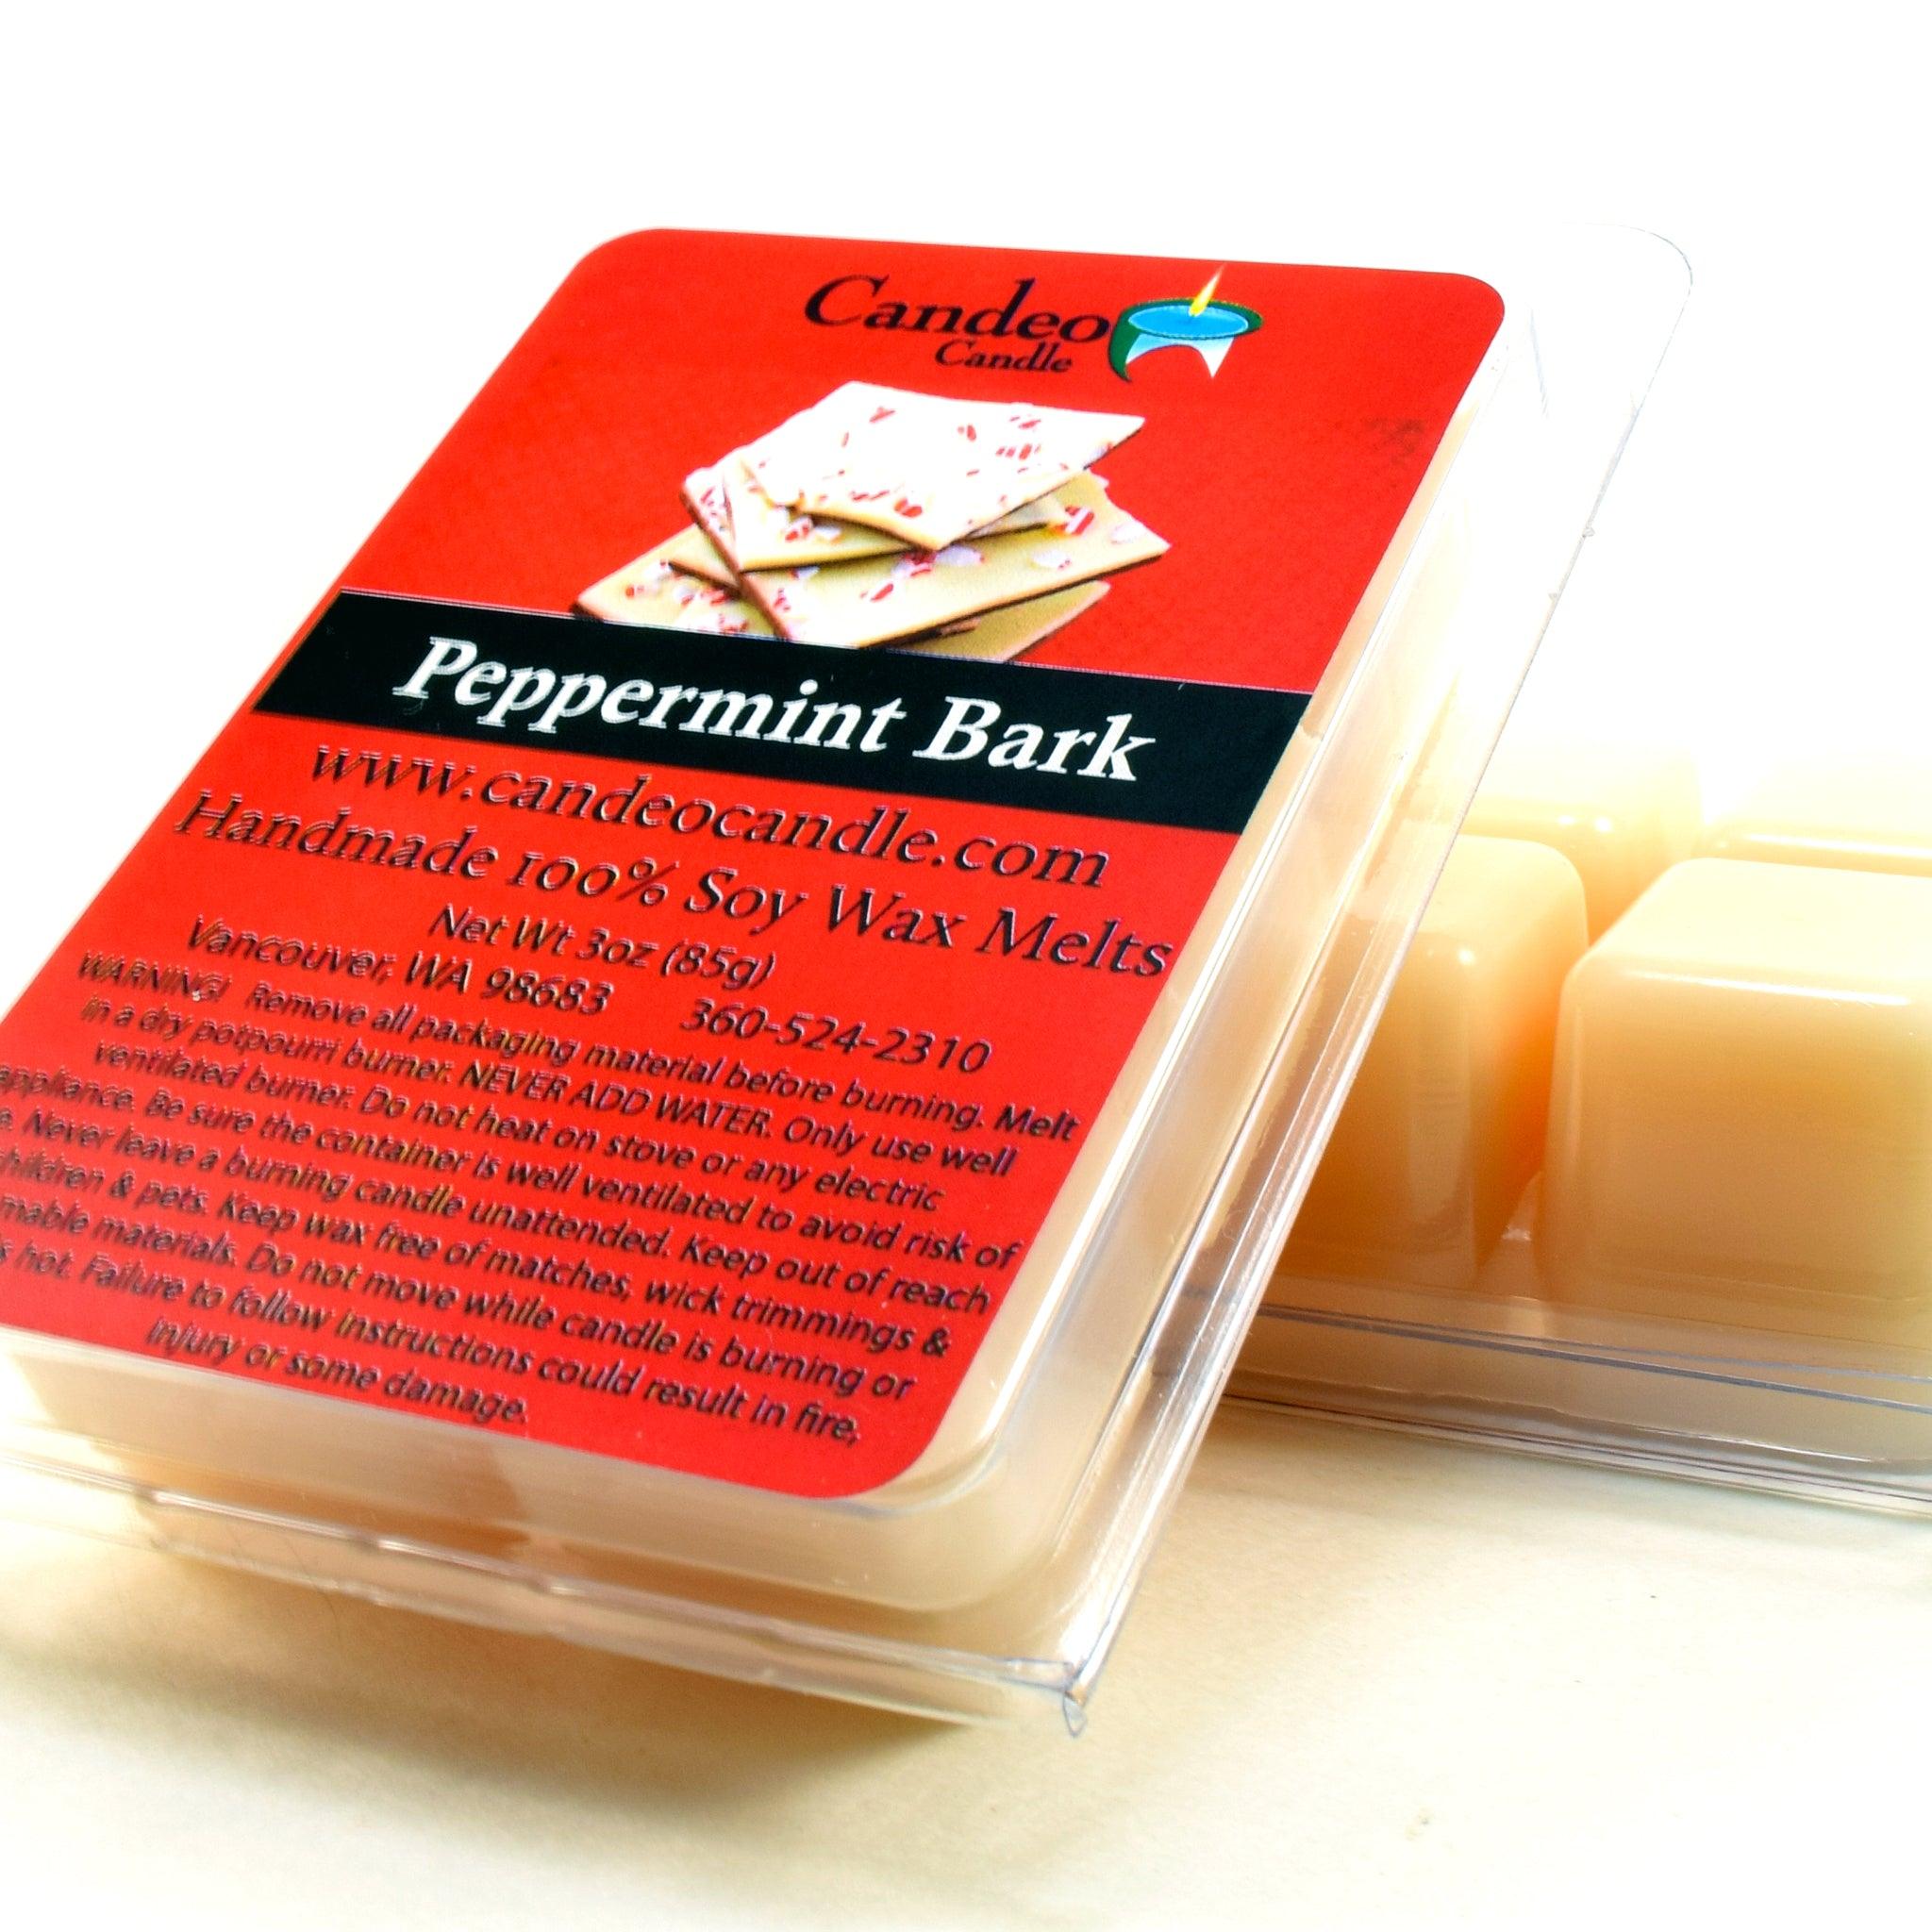 Peppermint Bark, Soy Melt Cubes, 2-Pack - Candeo Candle